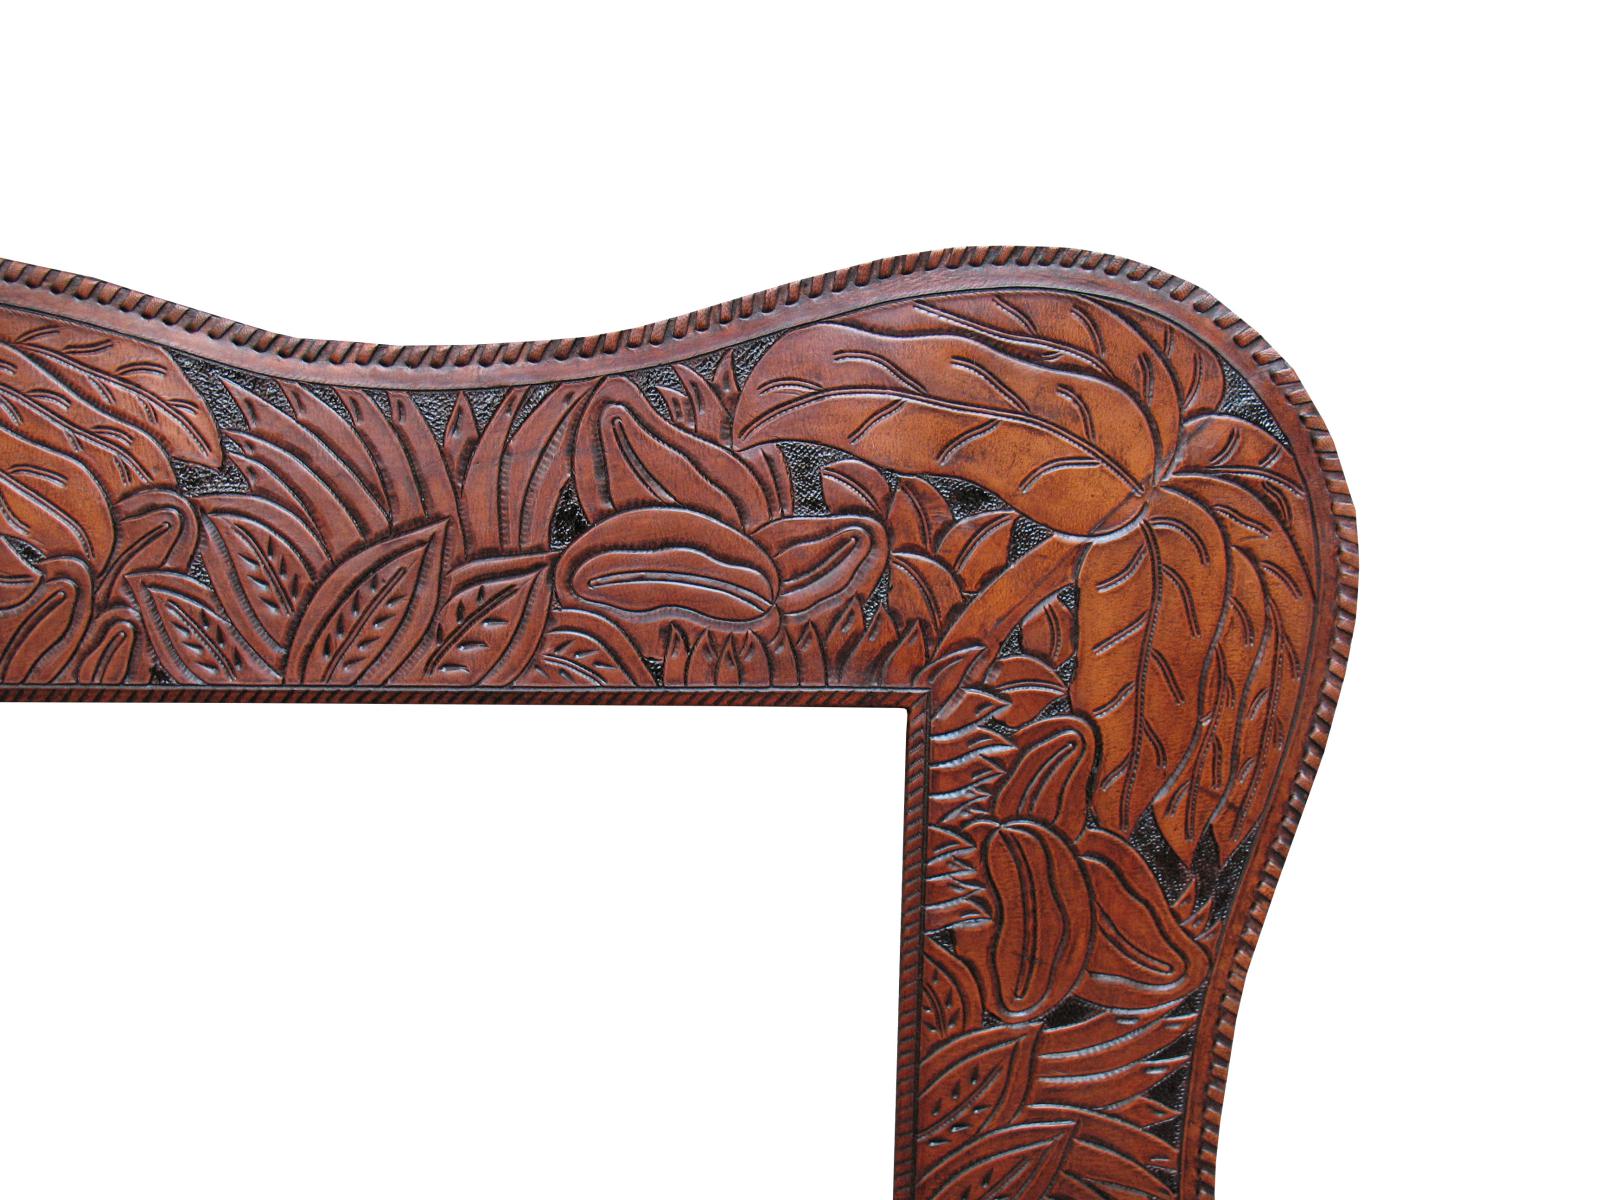 leather frames western hand tooled/tooling sheets design with Serpentine shape, hand stitch edge lacing